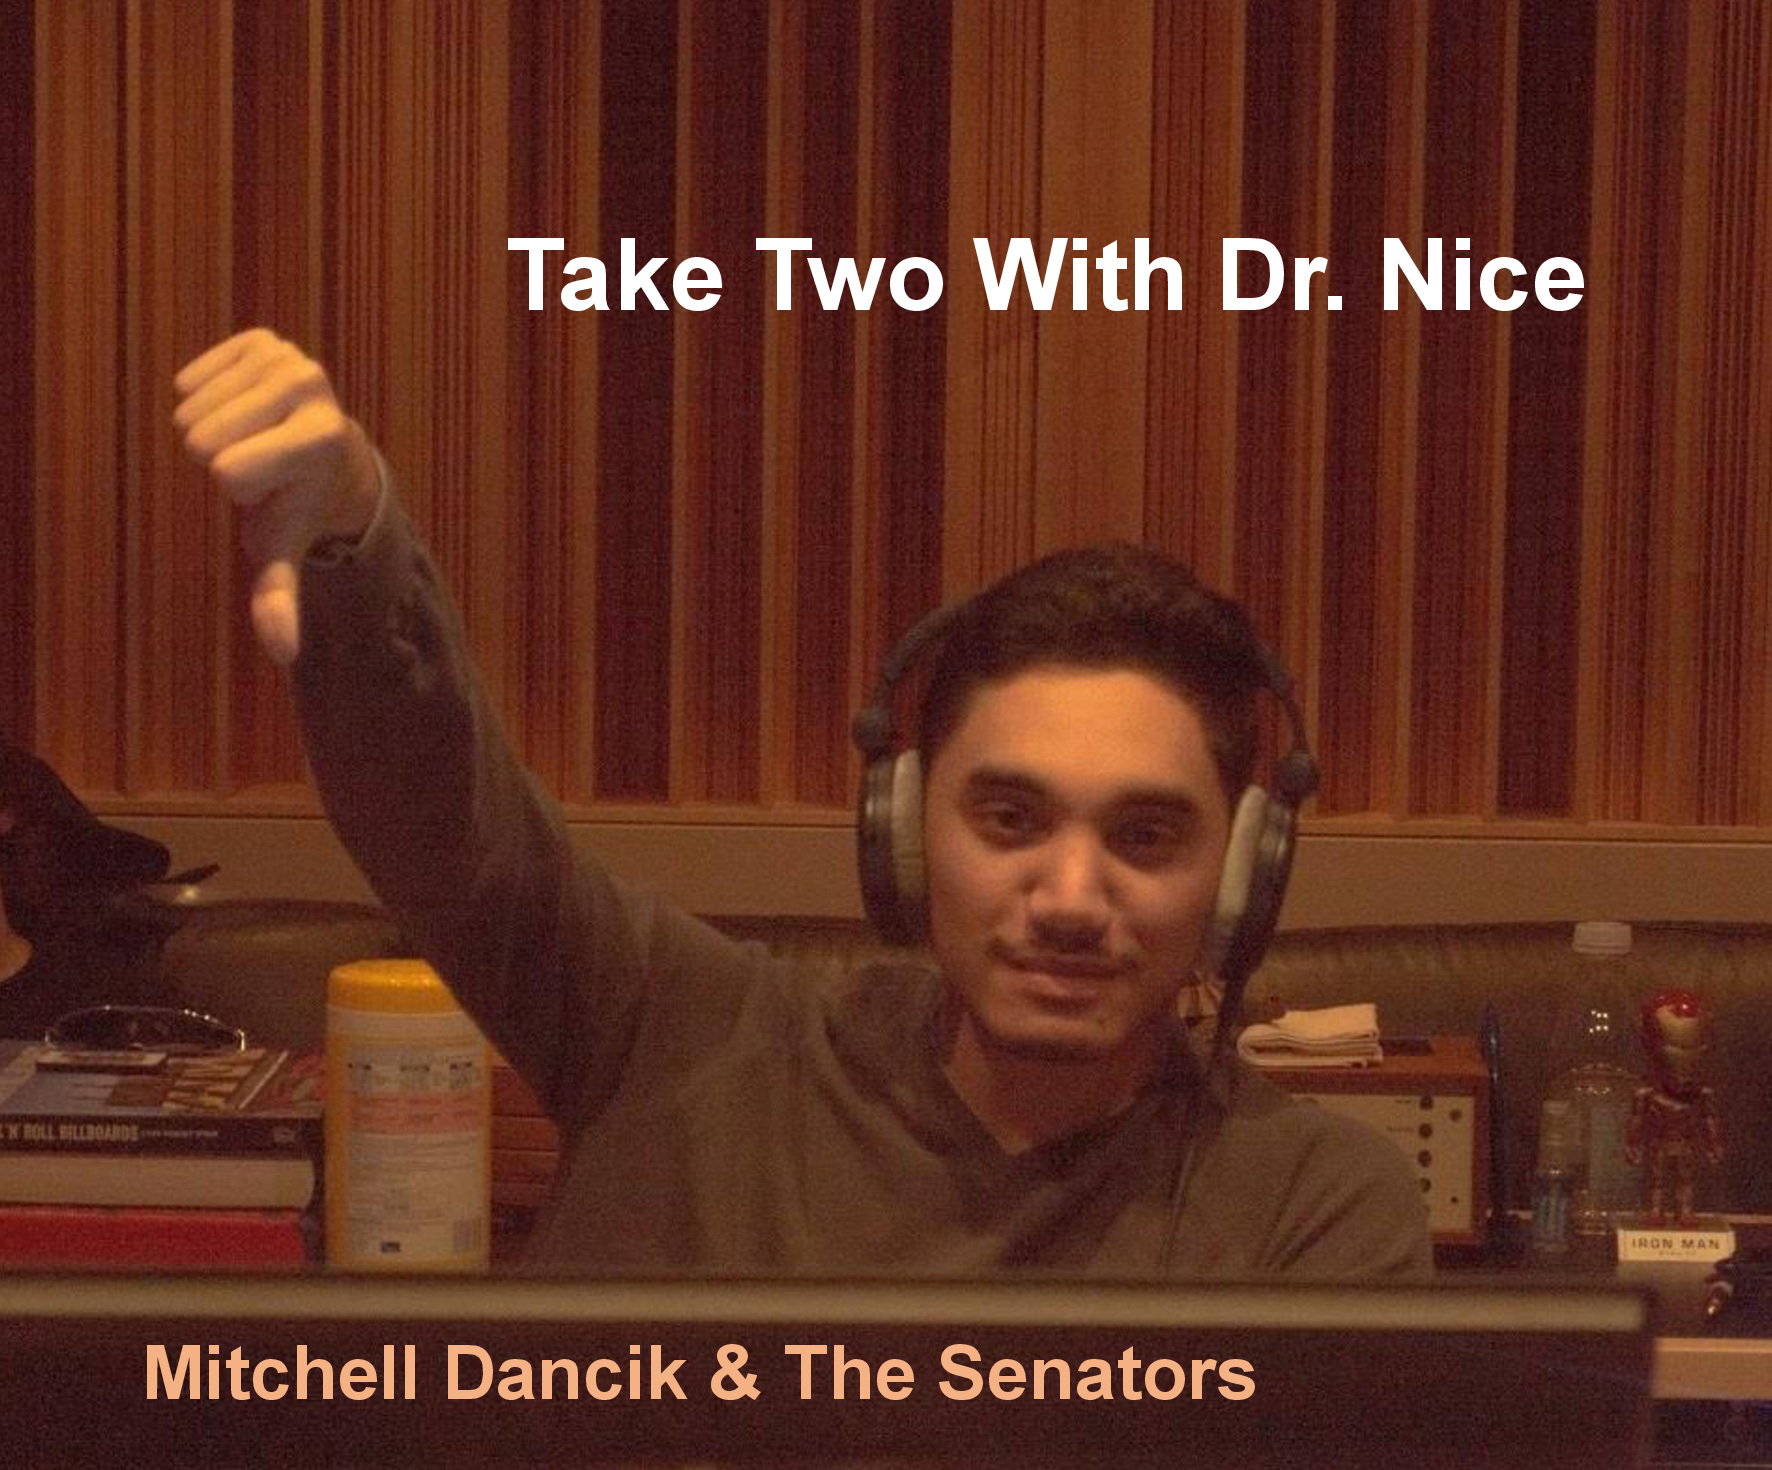 Take Two with Dr. Nice